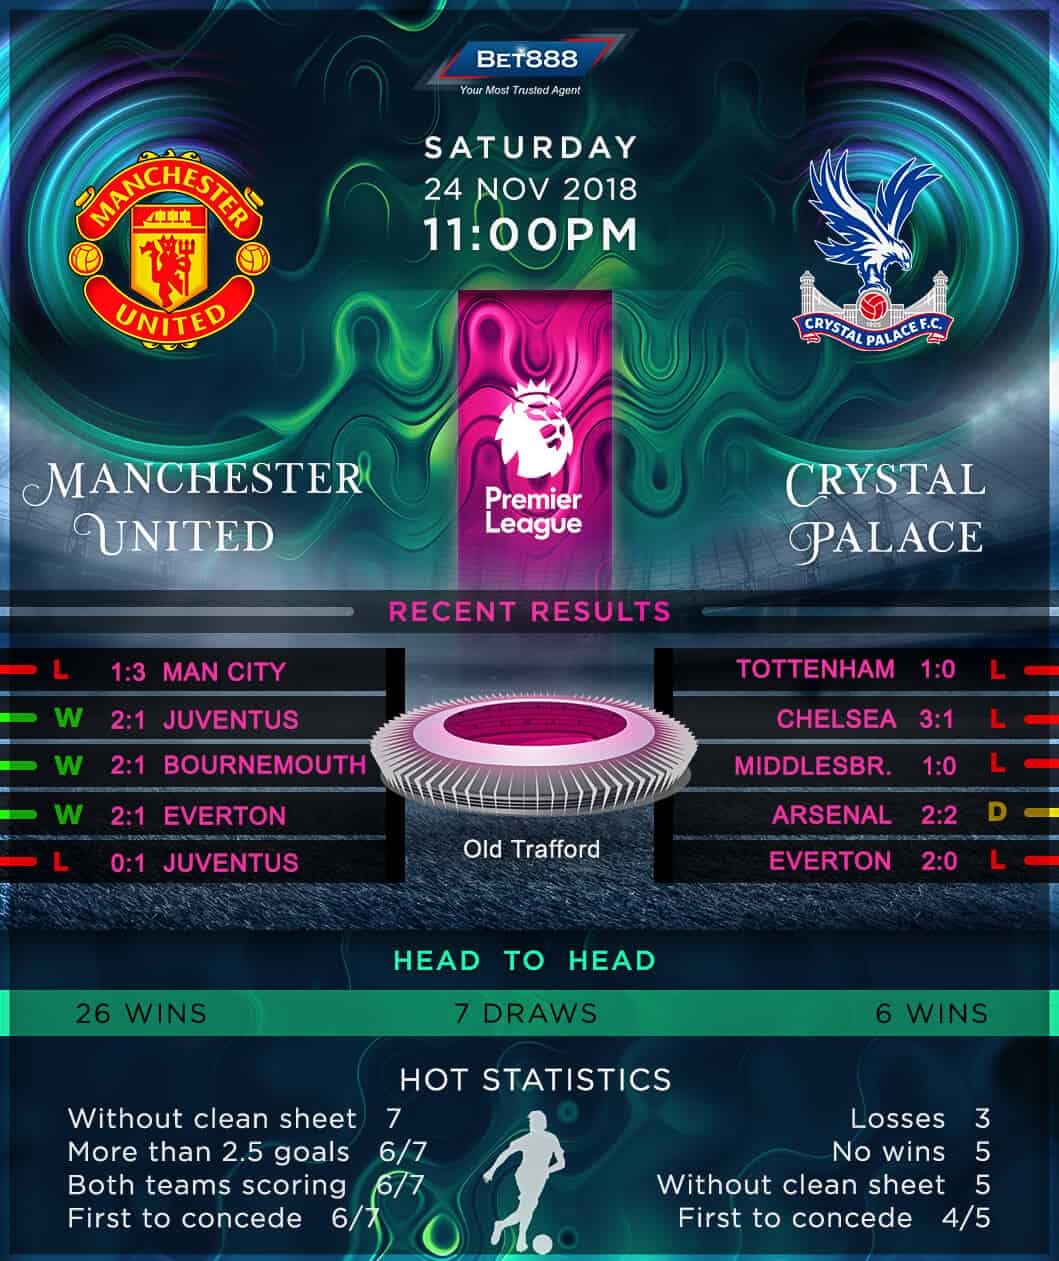 Manchester United vs Crystal Palace 24/11/18